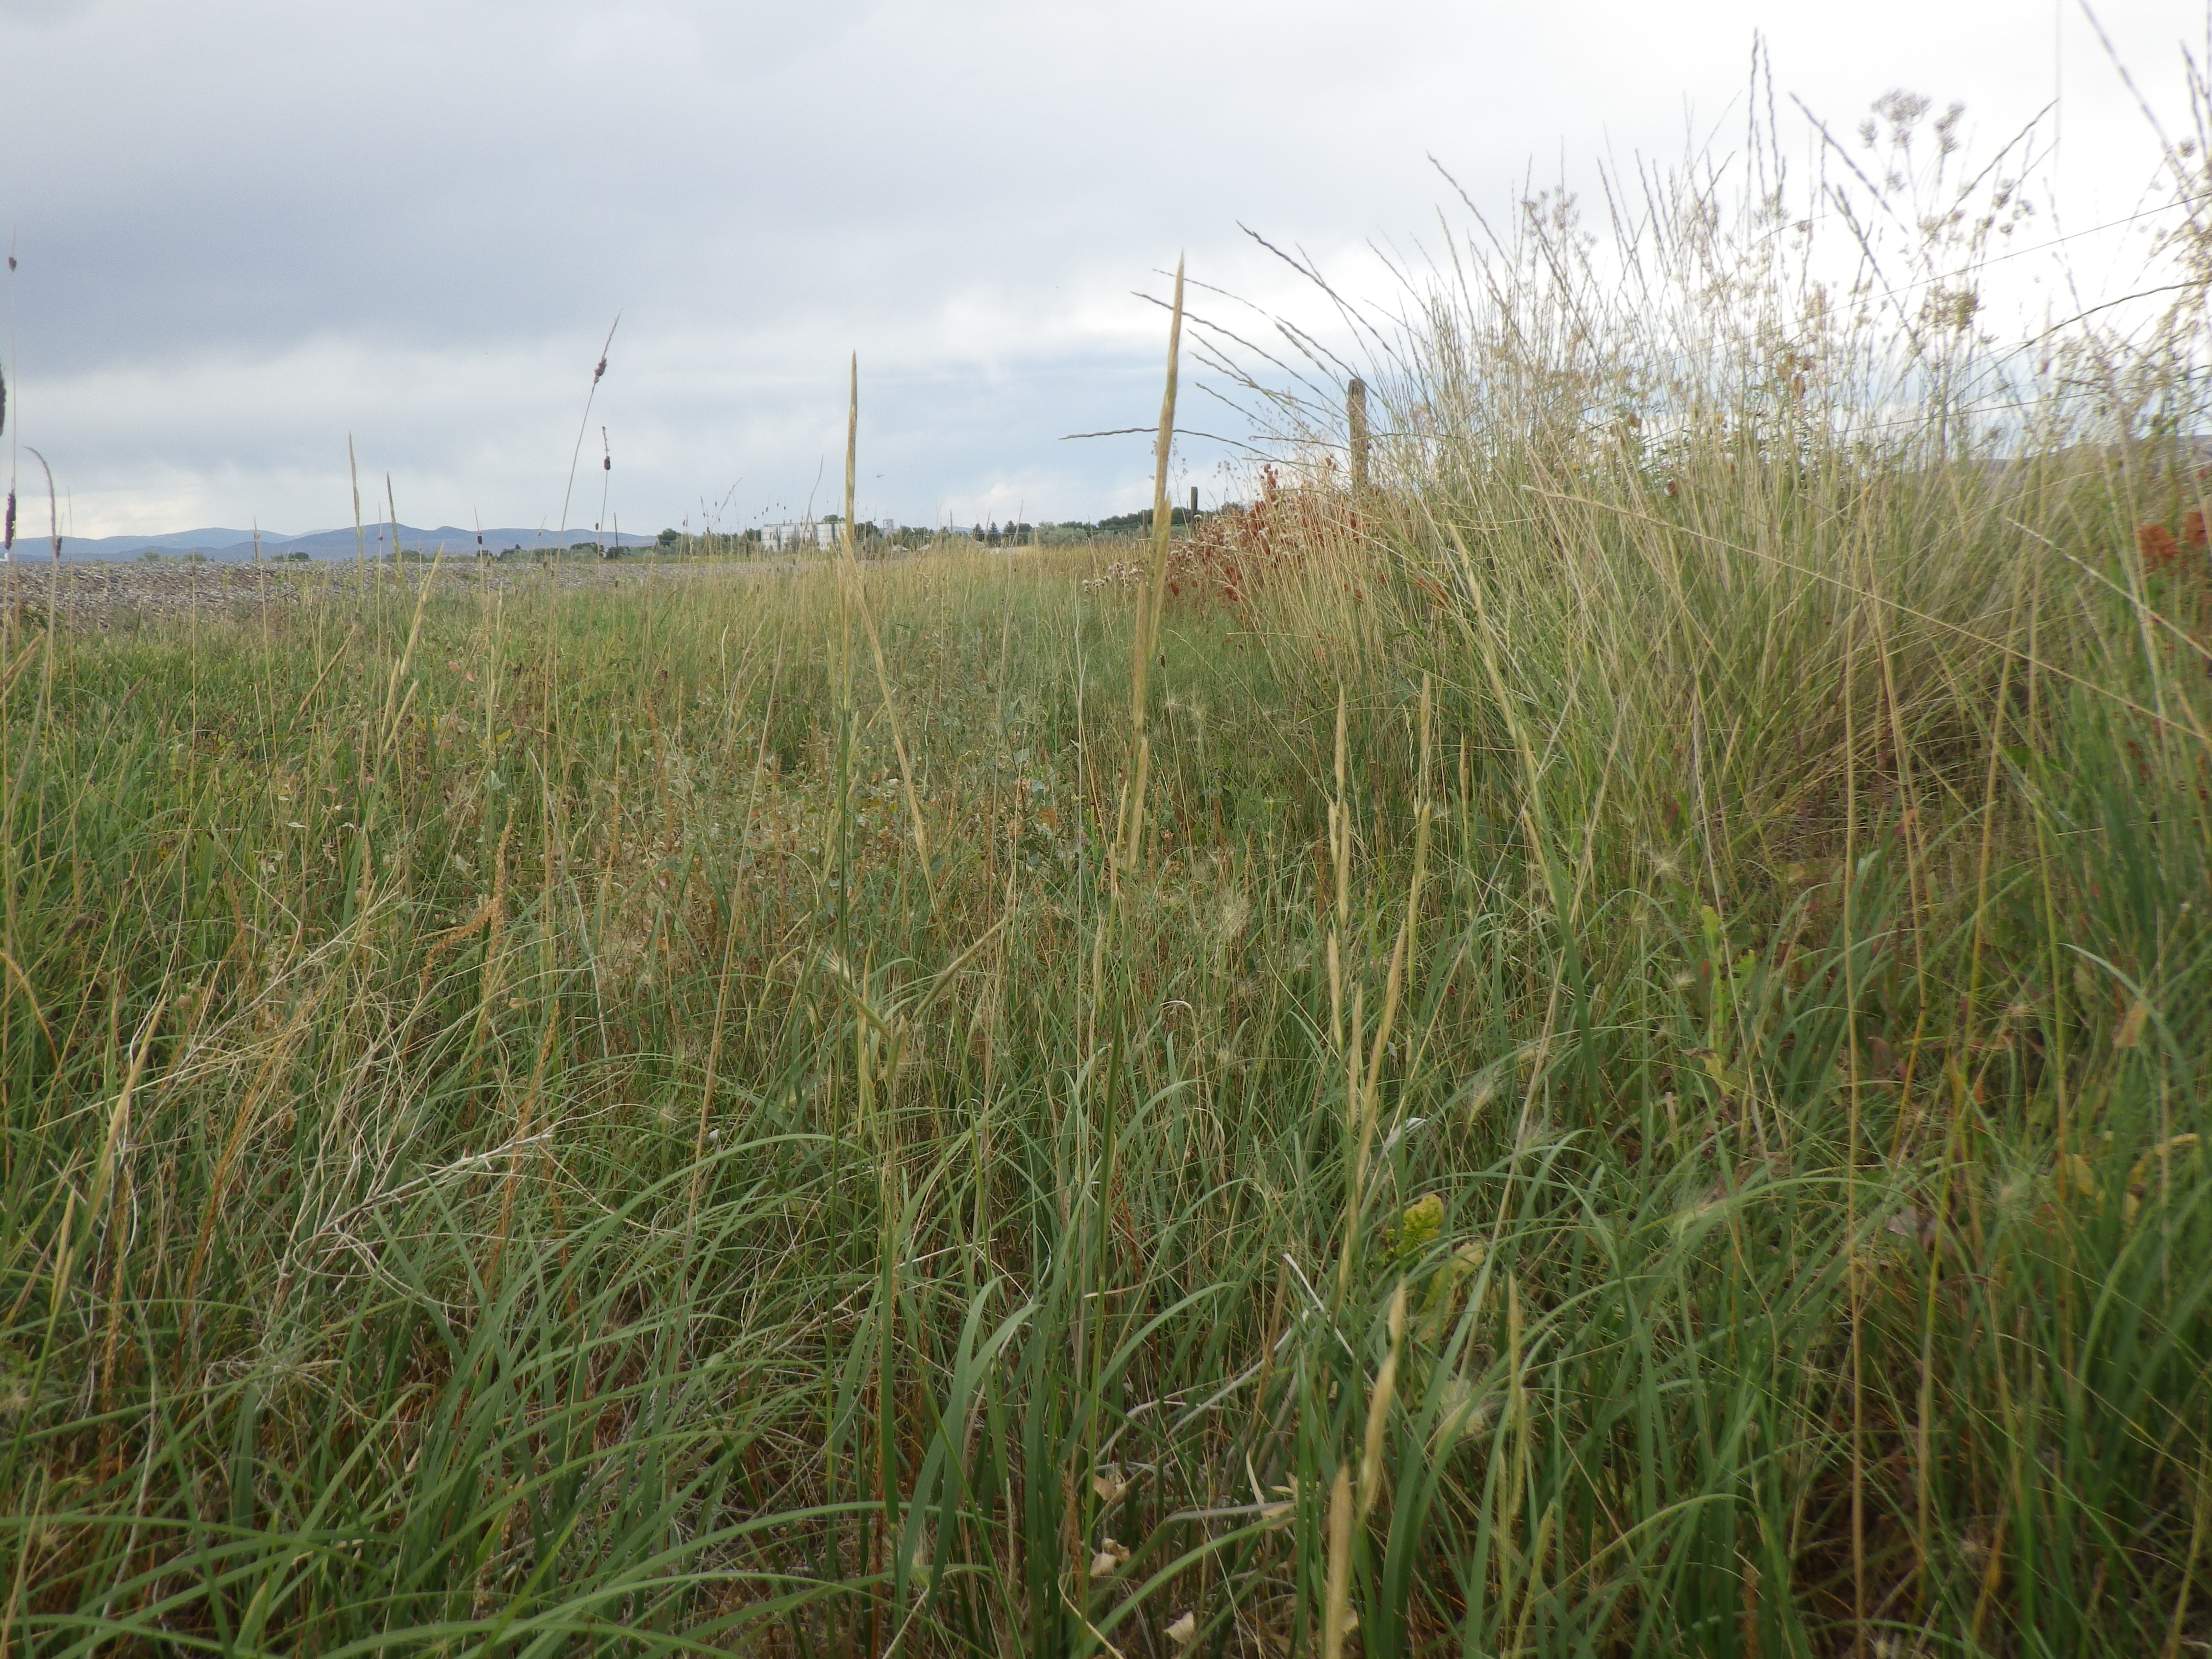 View of a patch of alkali cordgrass showing grassland habitat